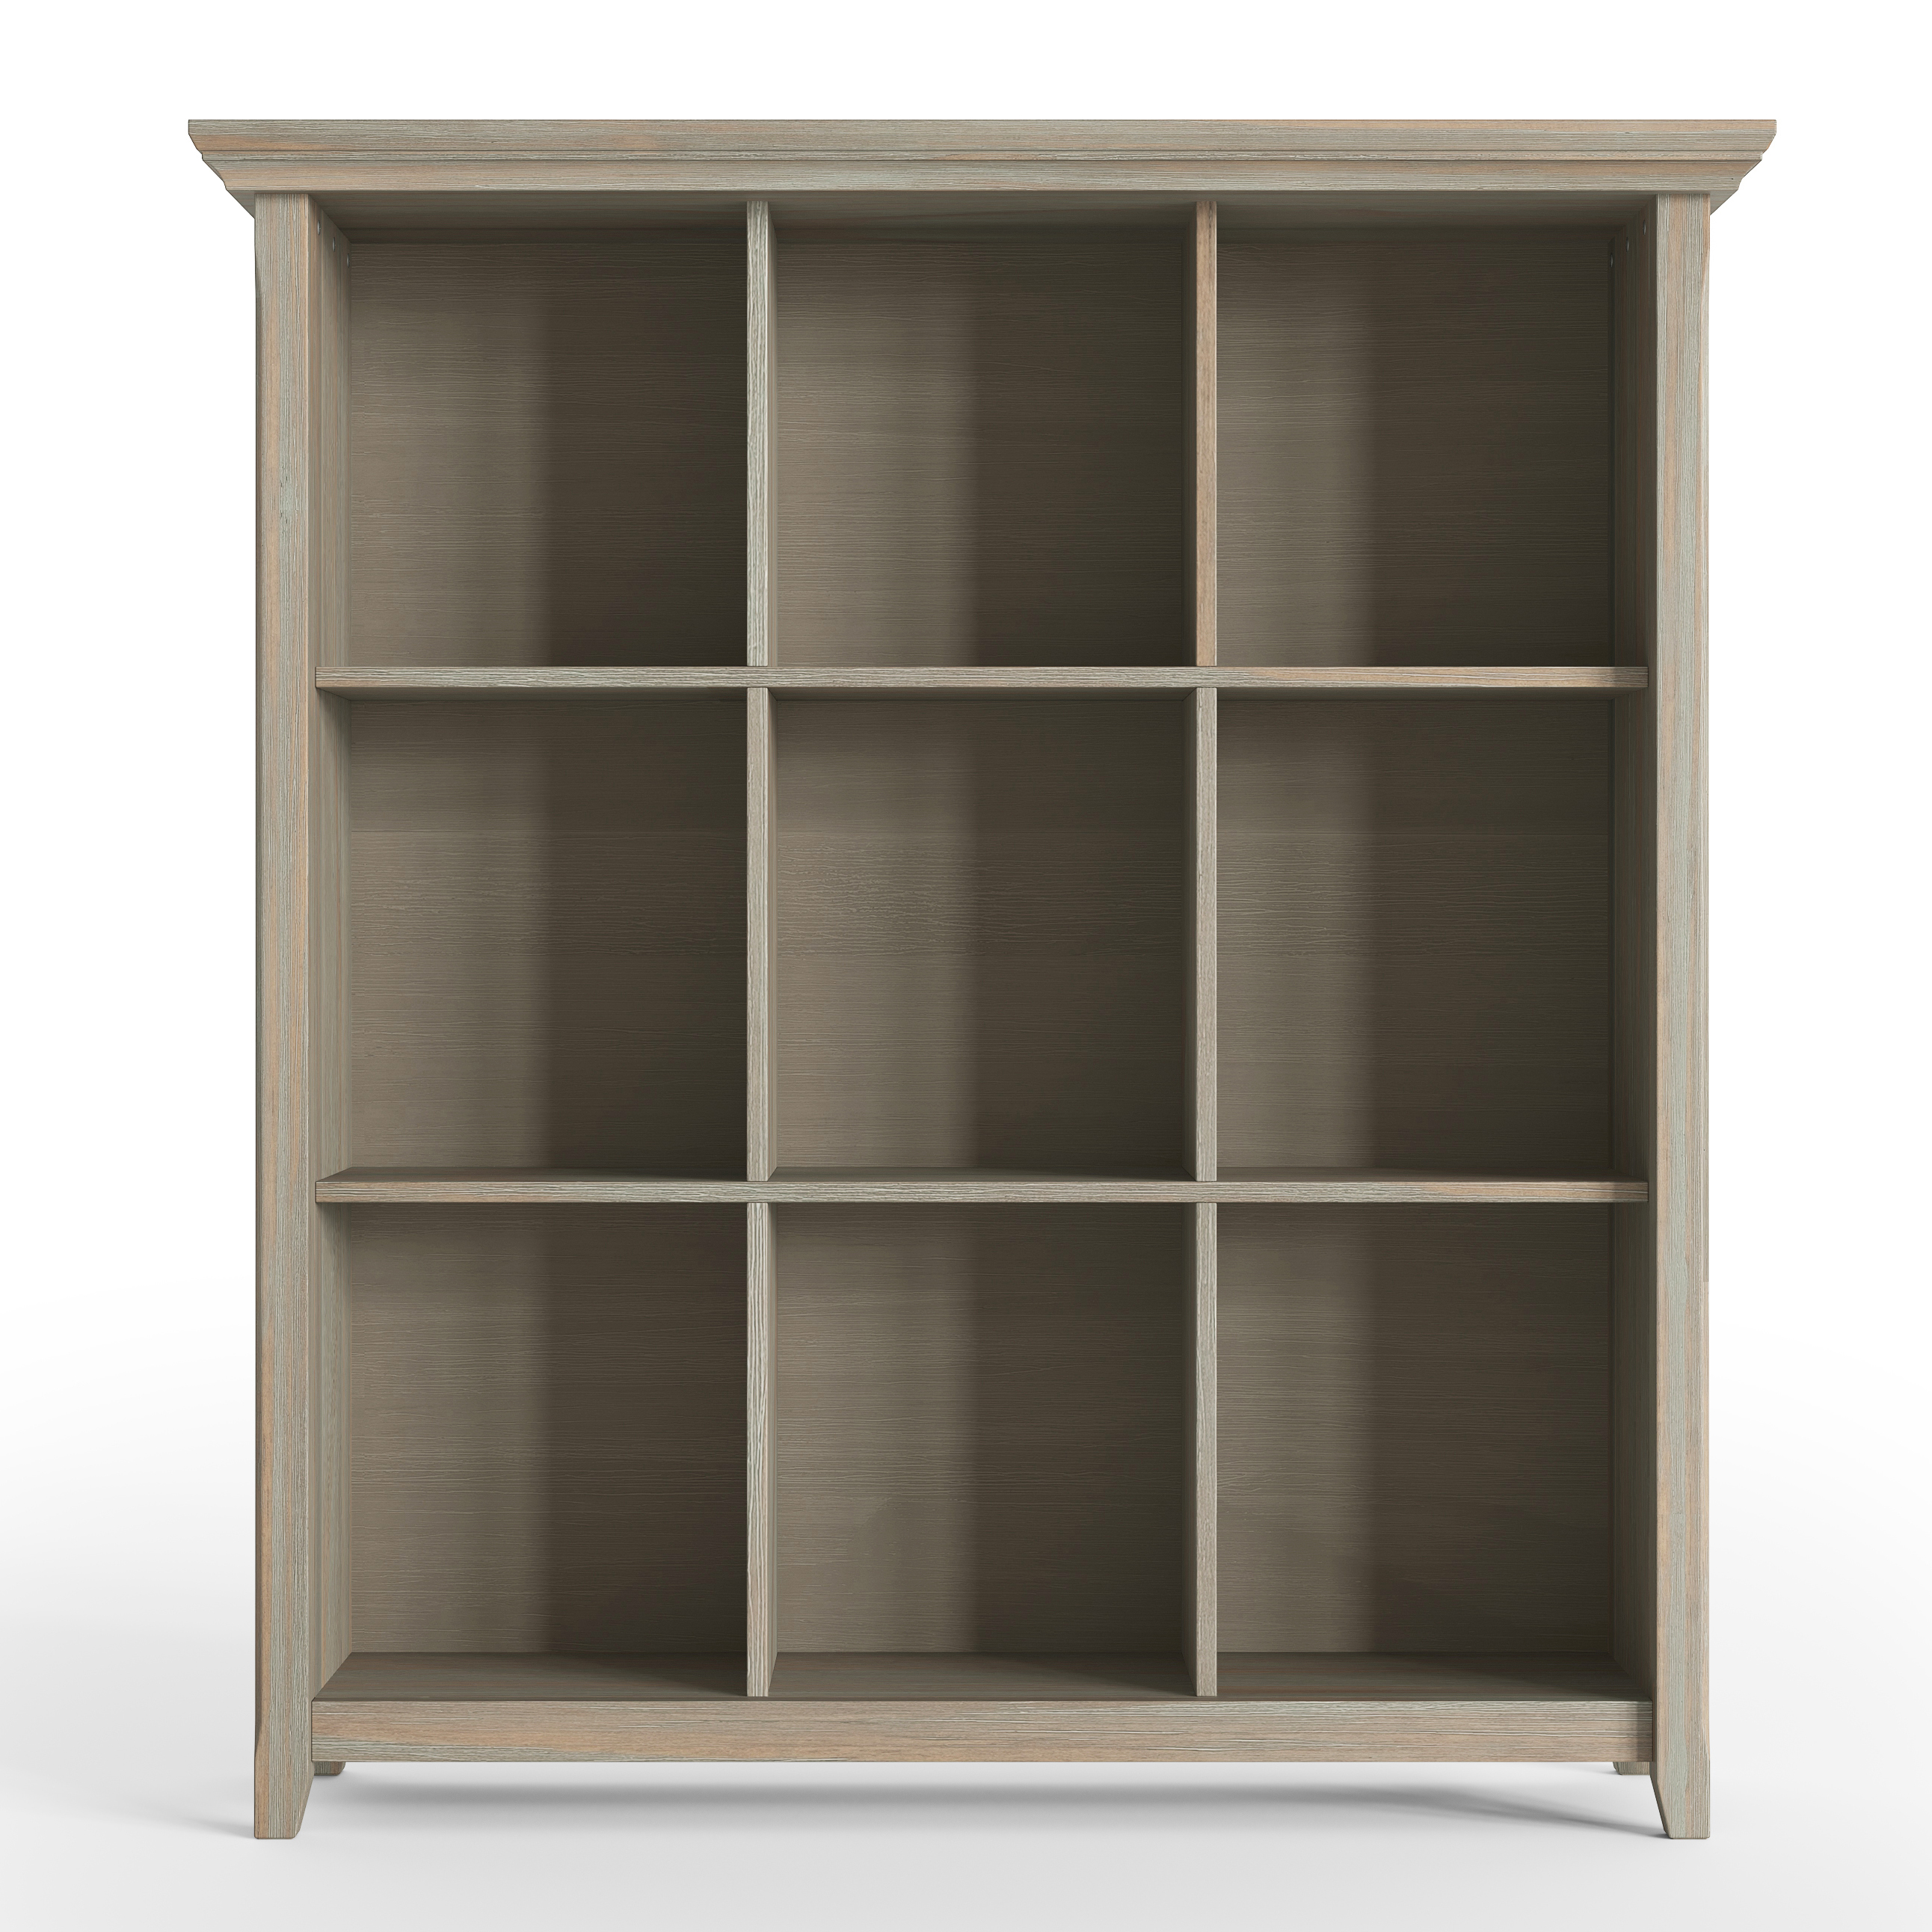 44 Inch Transitional 9 Cube Bookcase, Distressed Shelving Unit